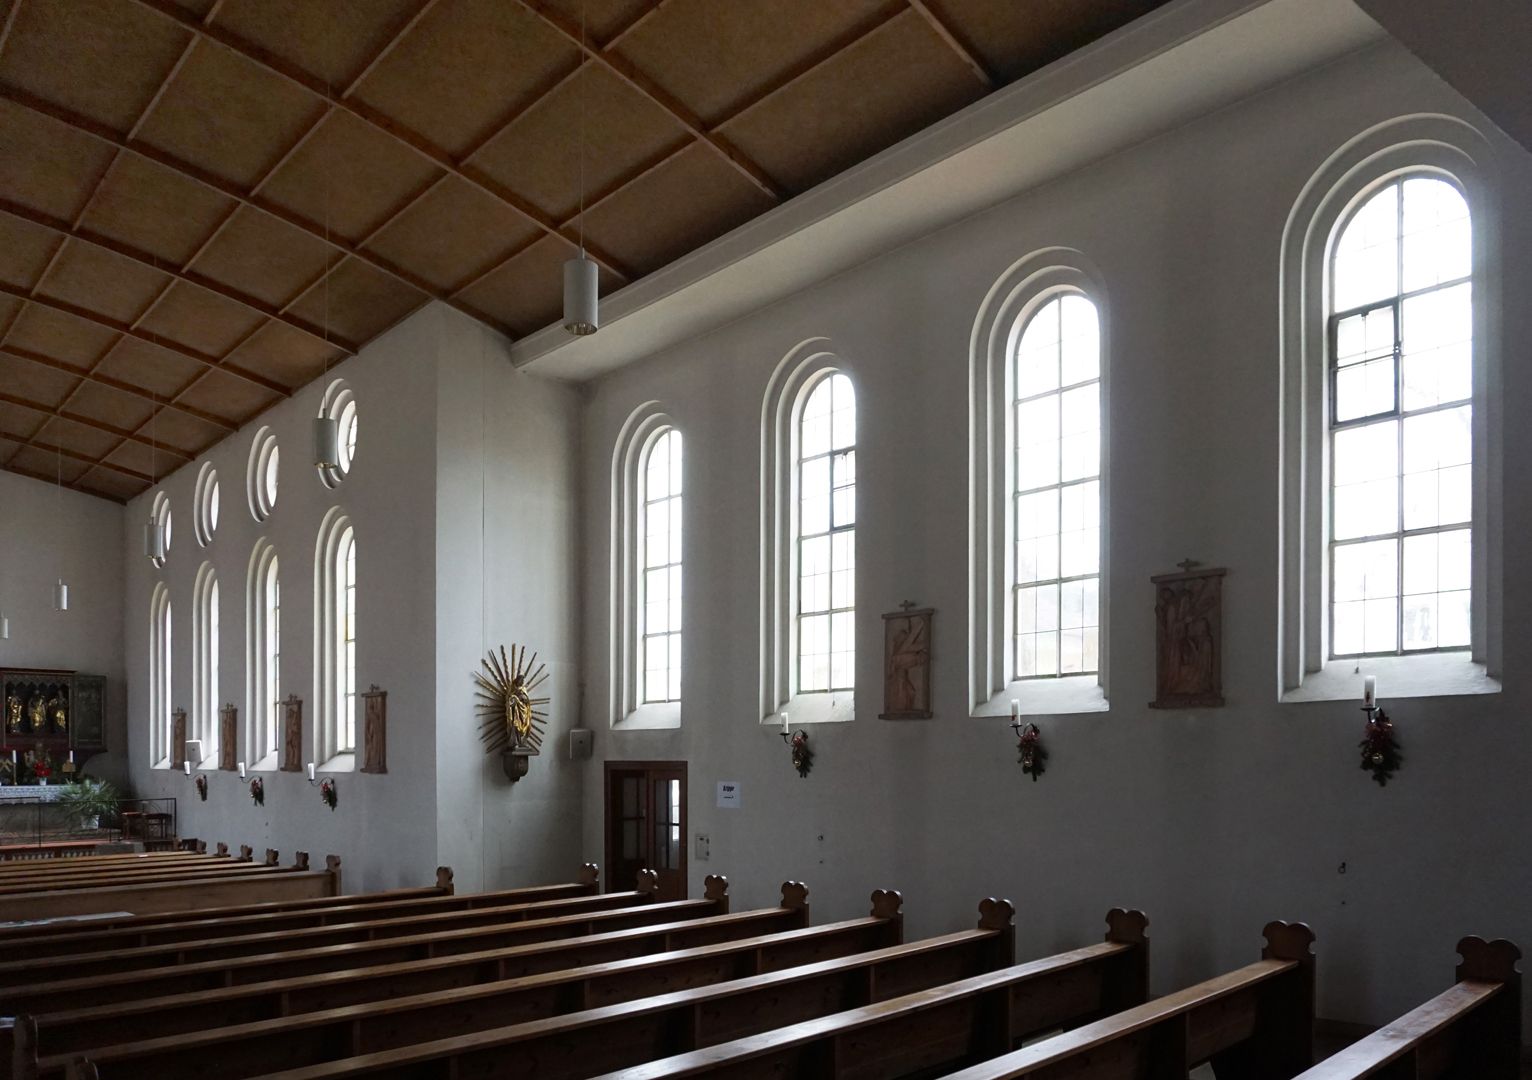 St. Sebald Nave of the extension building